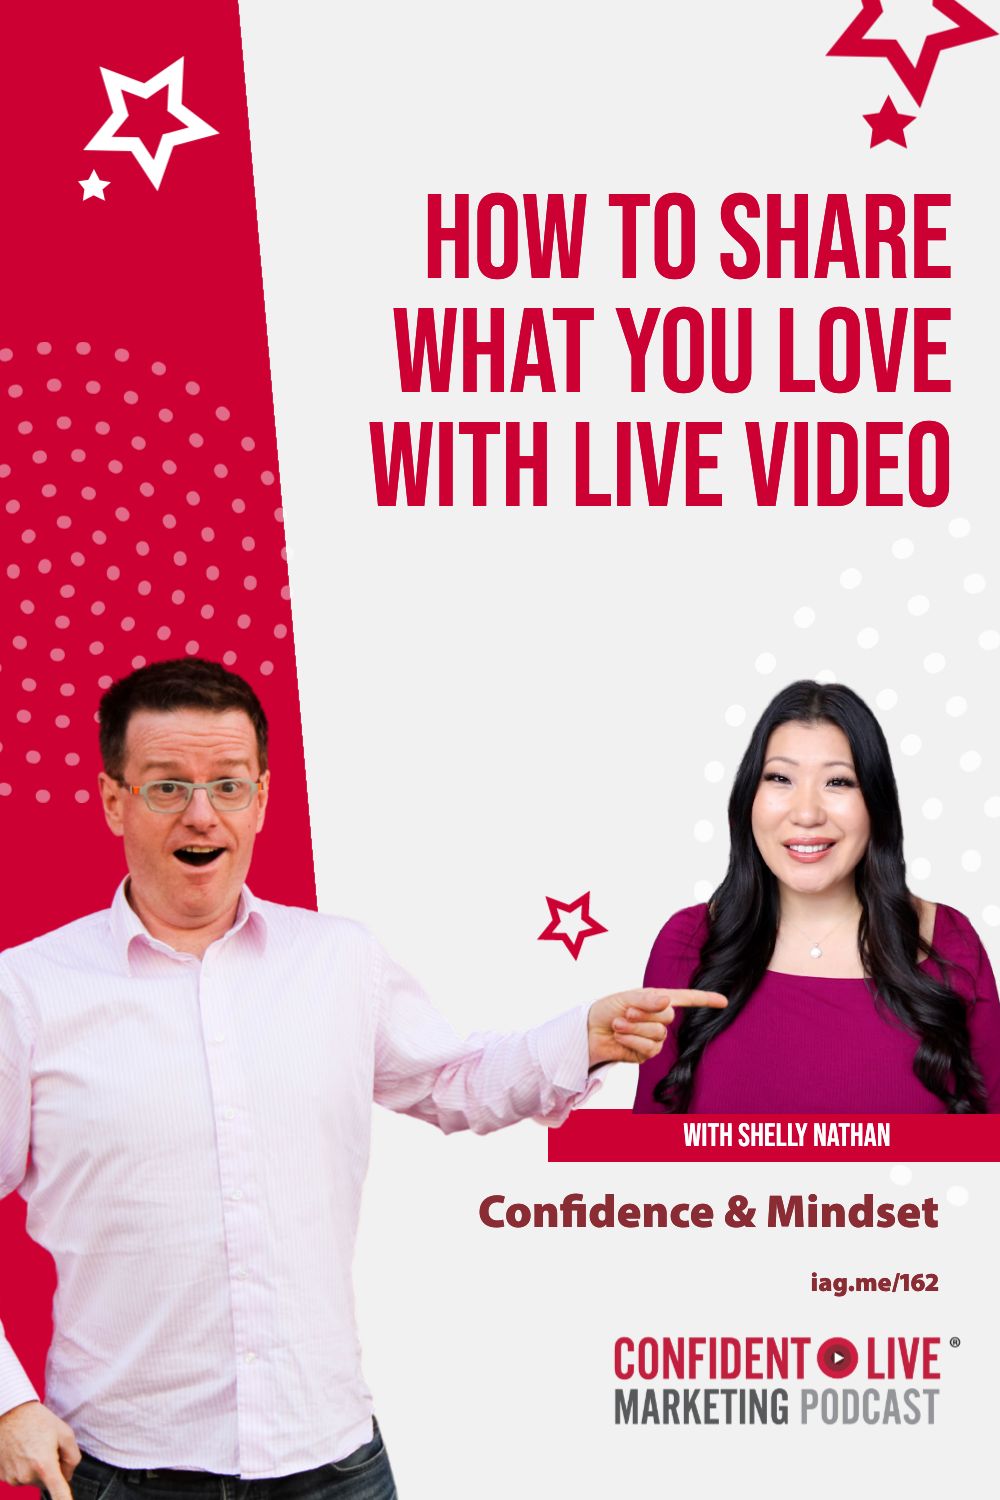 How to Share What You Love with Live Video